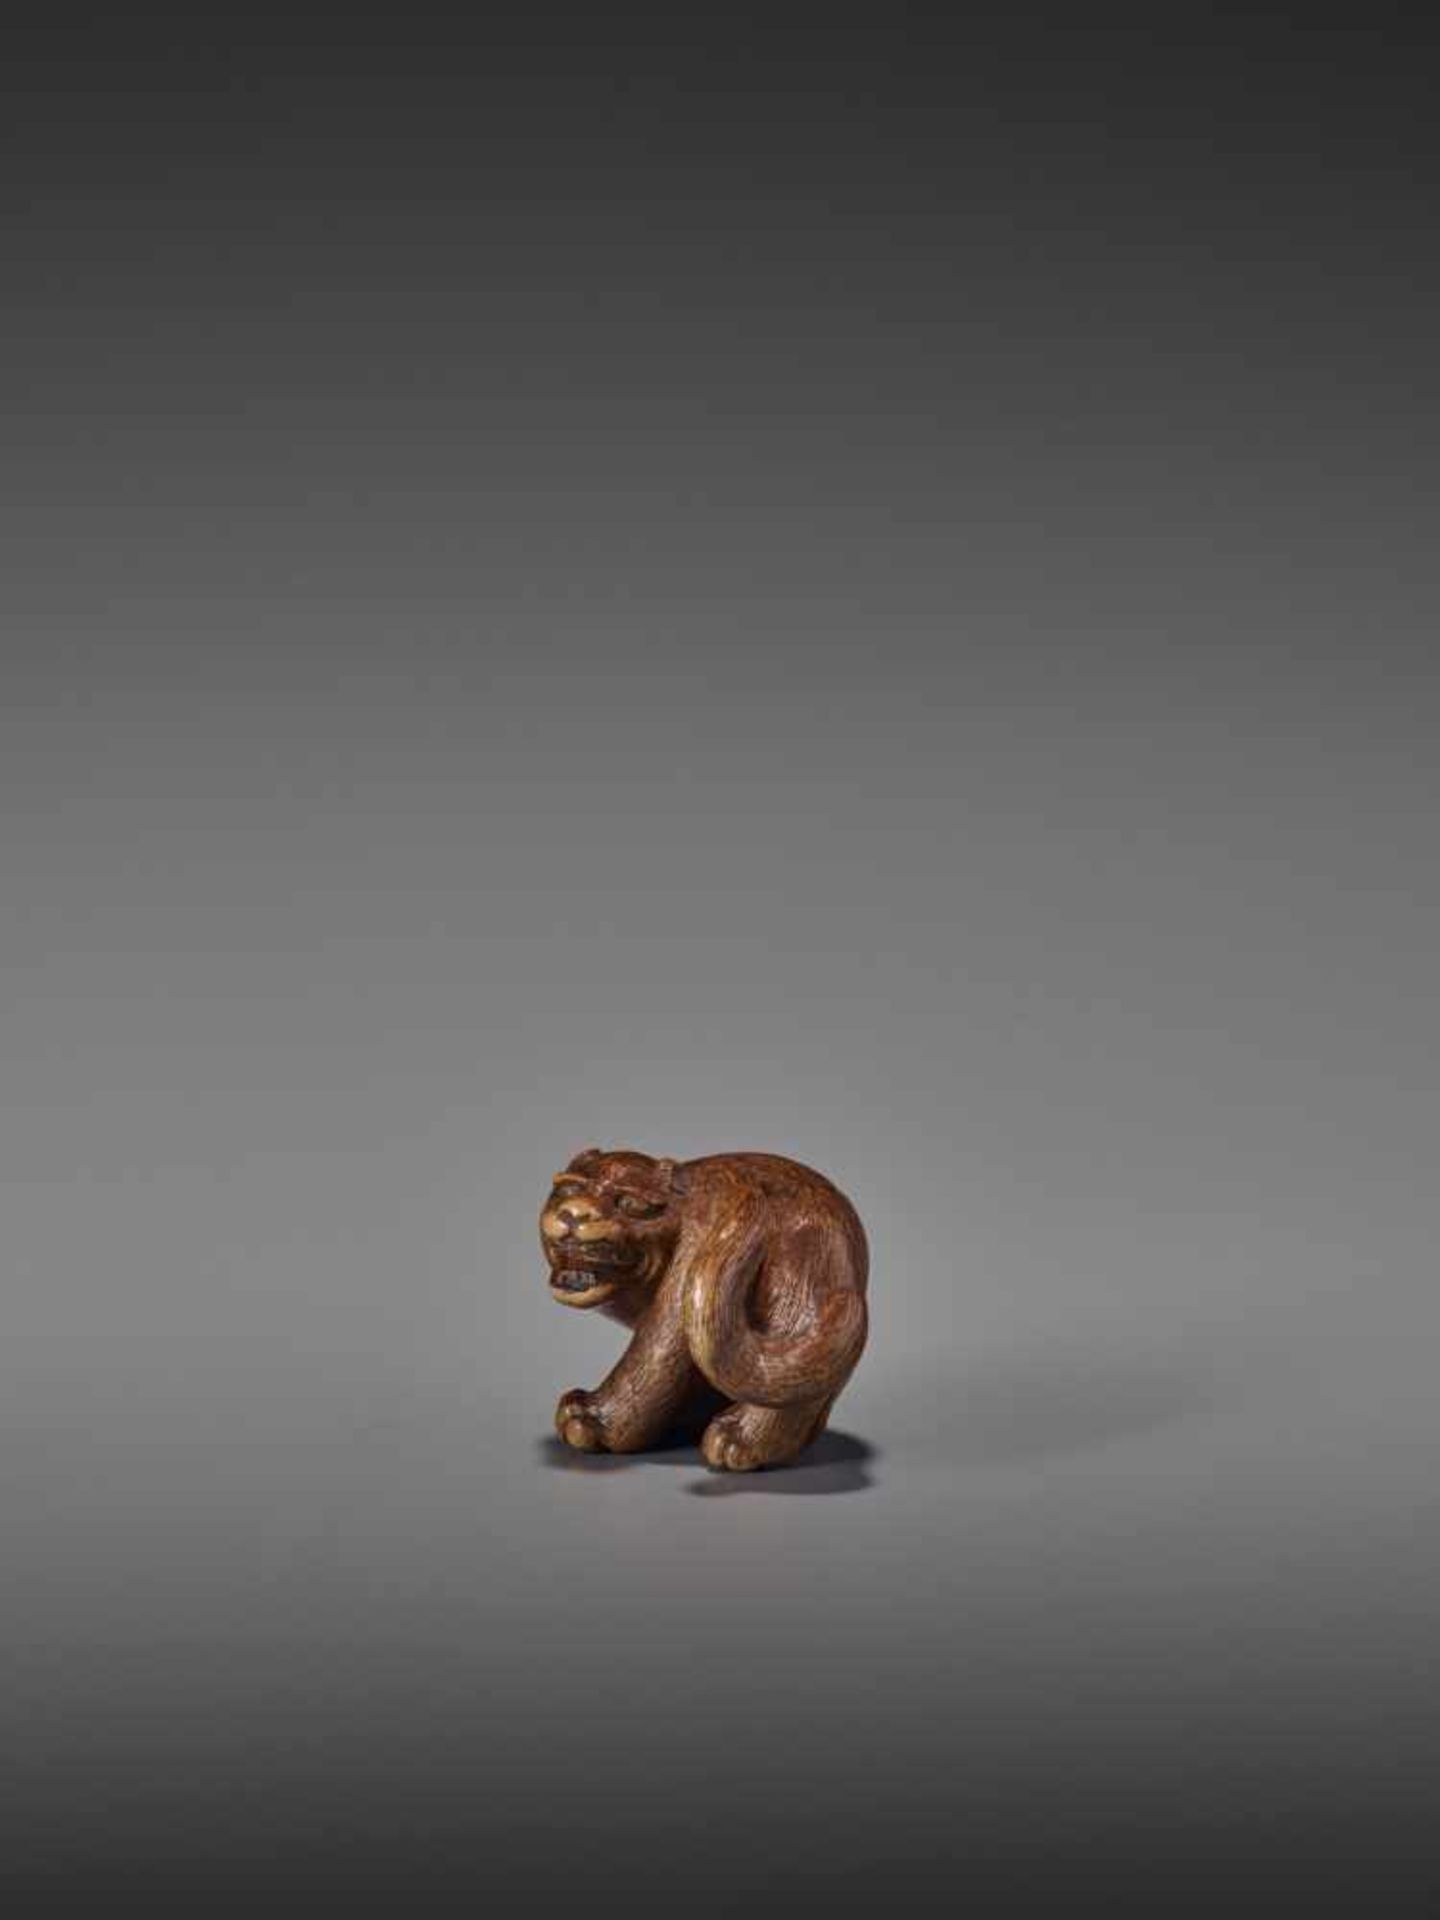 A RARE WOOD NETSUKE OF A SNARLING TIGER UnsignedJapan, 19th century, Edo period (1615-1868)A compact - Image 3 of 11